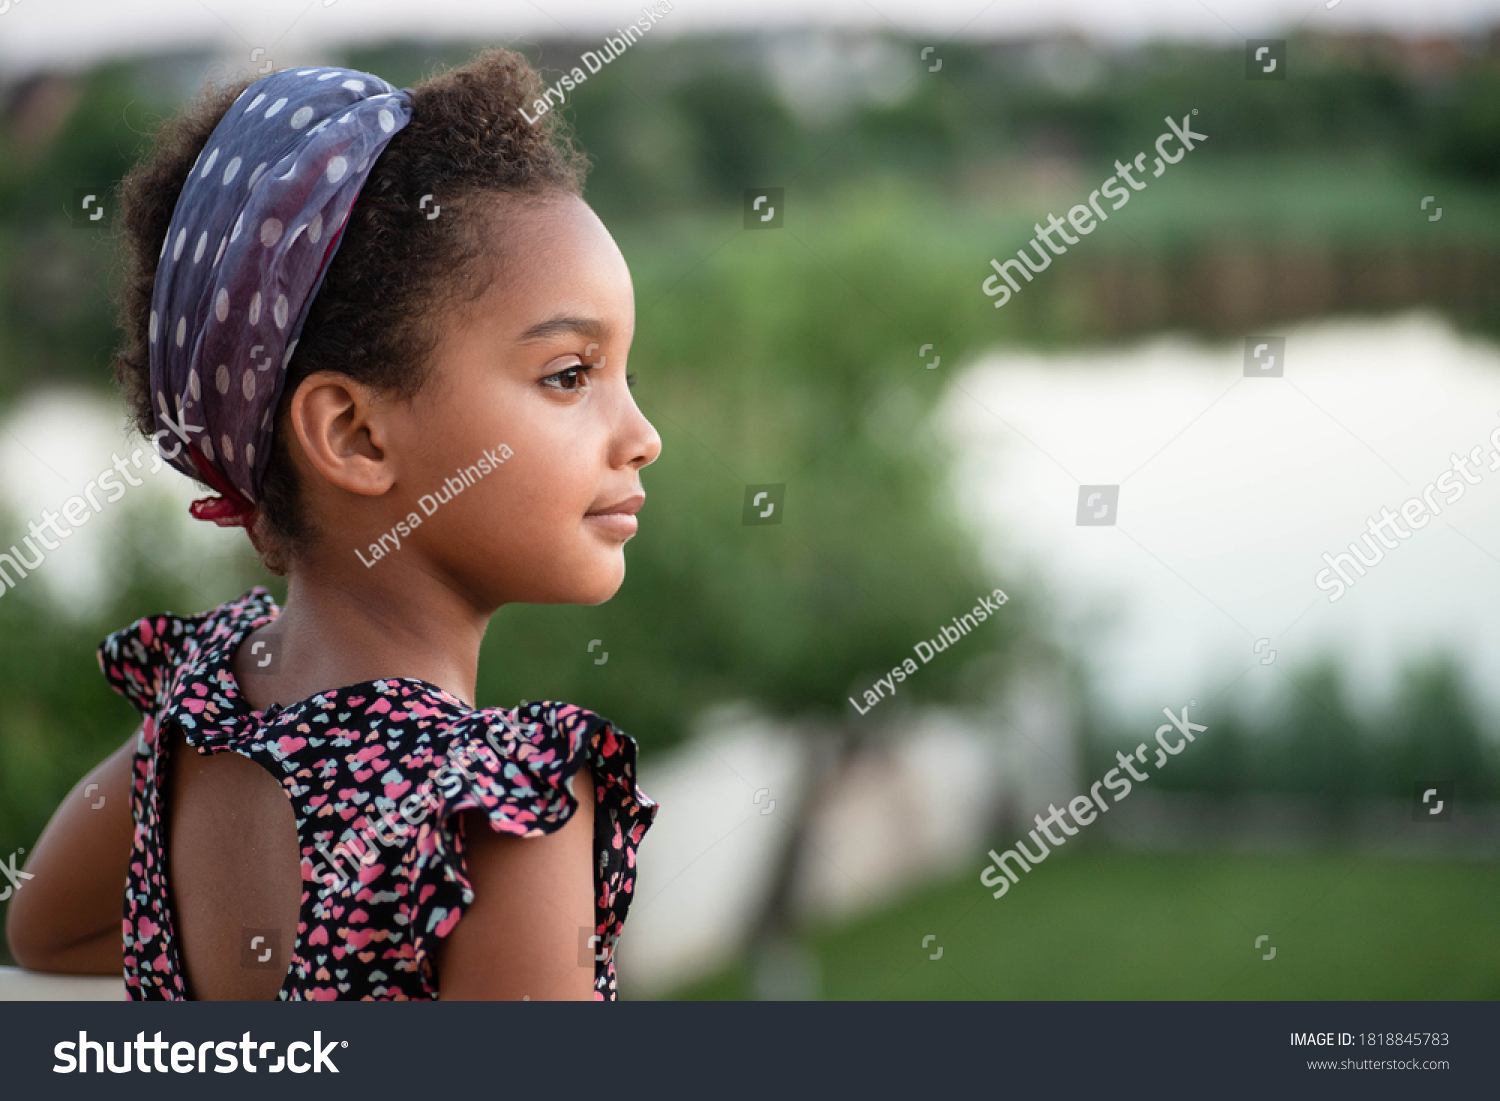 Portrait of beautiful mixed race kid in nature. Beautiful profile. Soft light. Afro hair. Child looks to the side. Concept of childhood, travel, future, dreams, peace. Copy space. Young girl outdoor. #1818845783